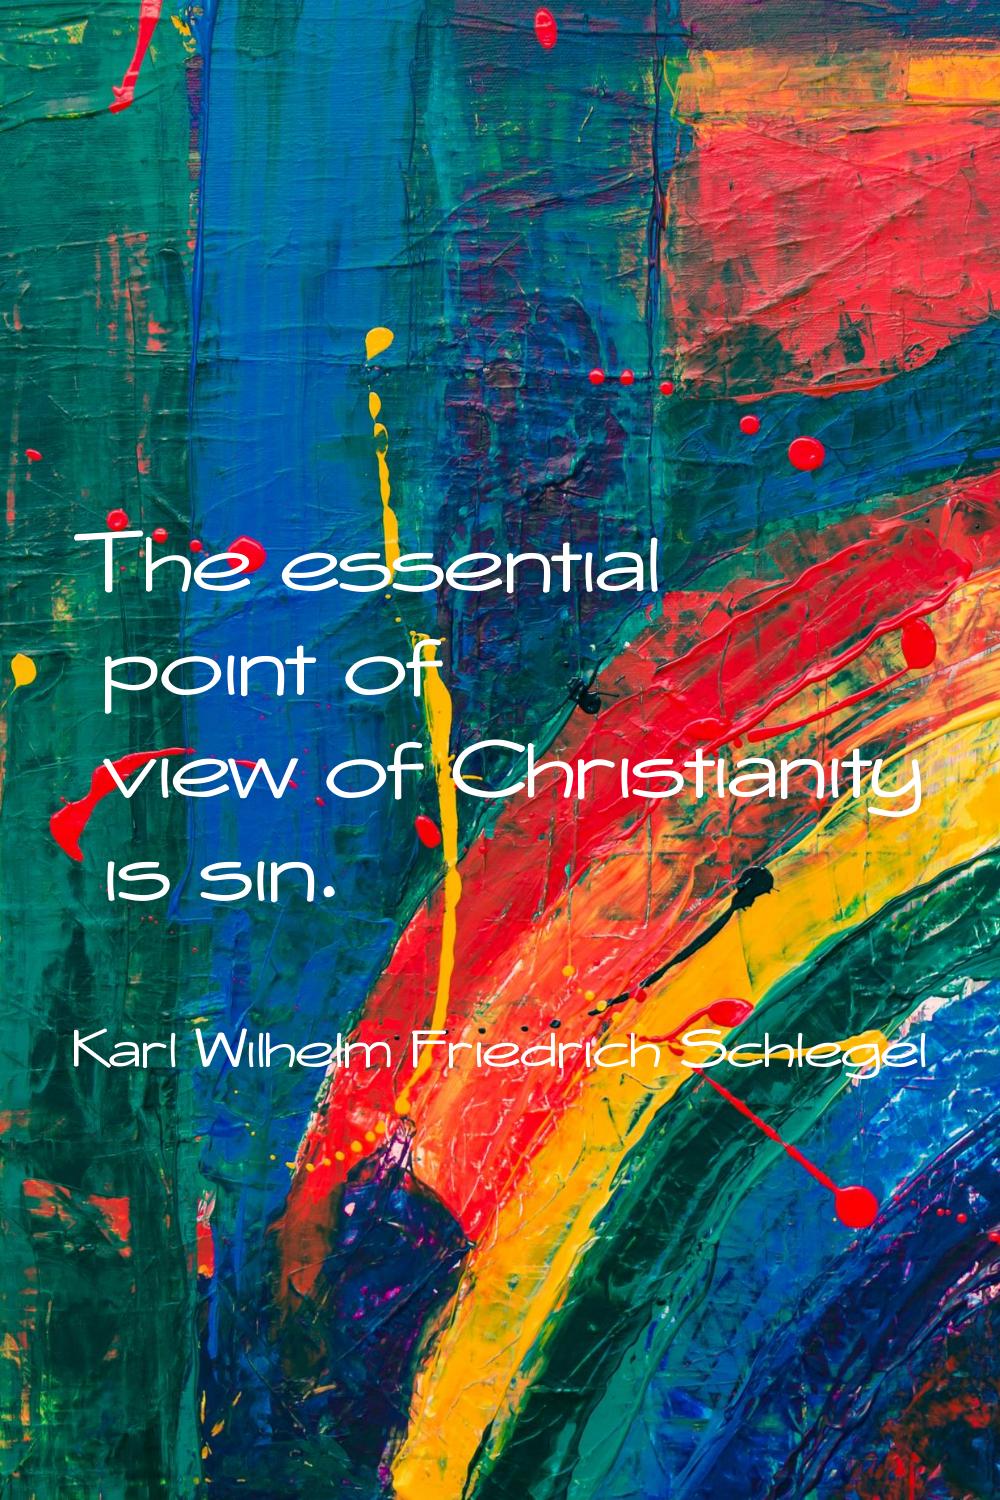 The essential point of view of Christianity is sin.